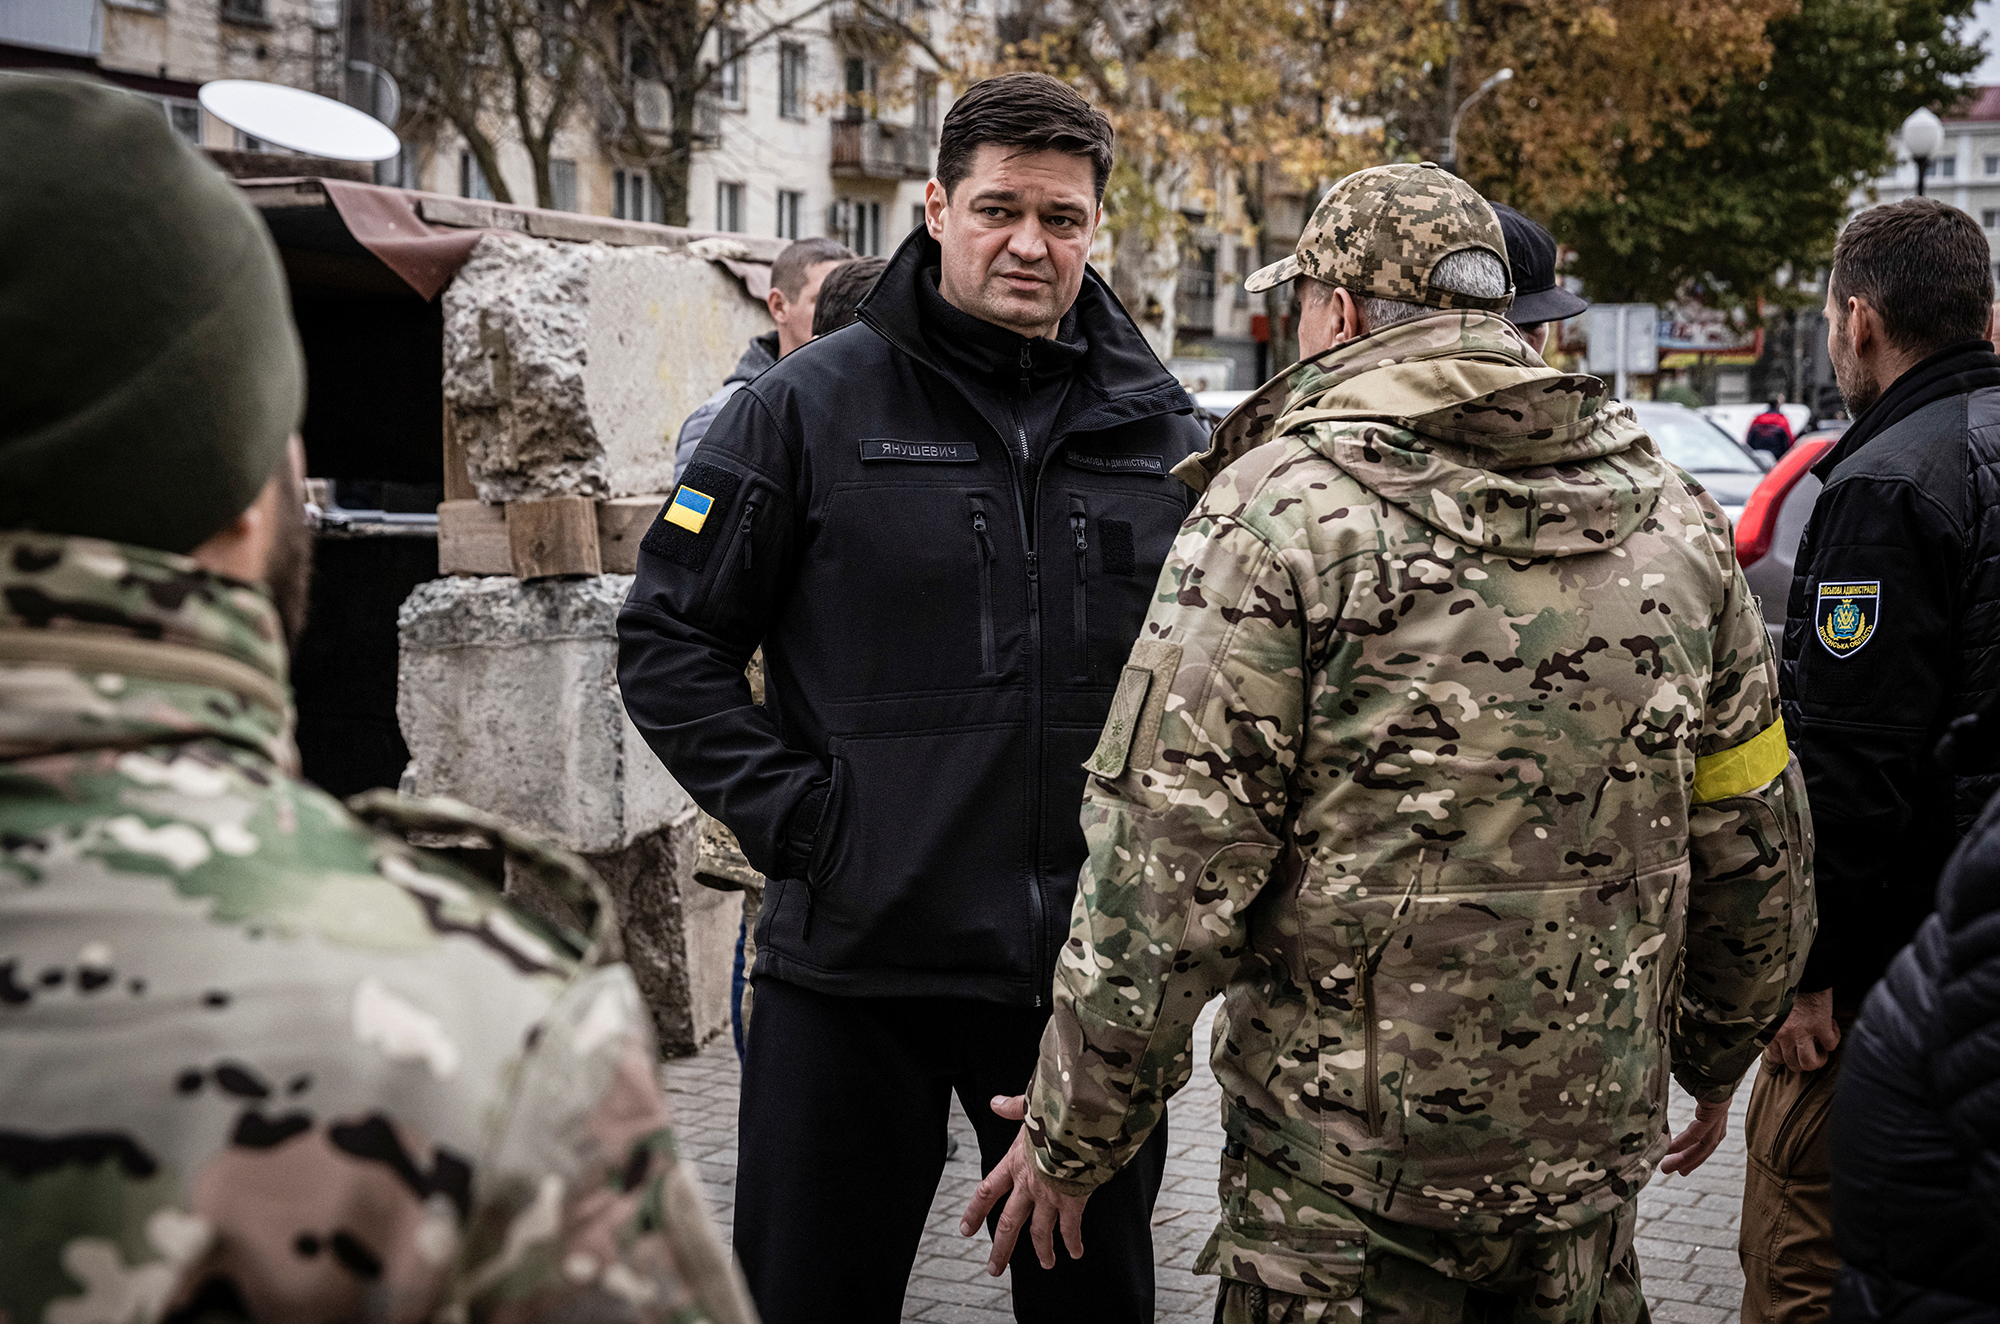 The governor of Kherson region, Yaroslav Yanushevych, speaks to a soldier in Kherson's Freedom Square, in Kherson, Ukraine, on November 16.